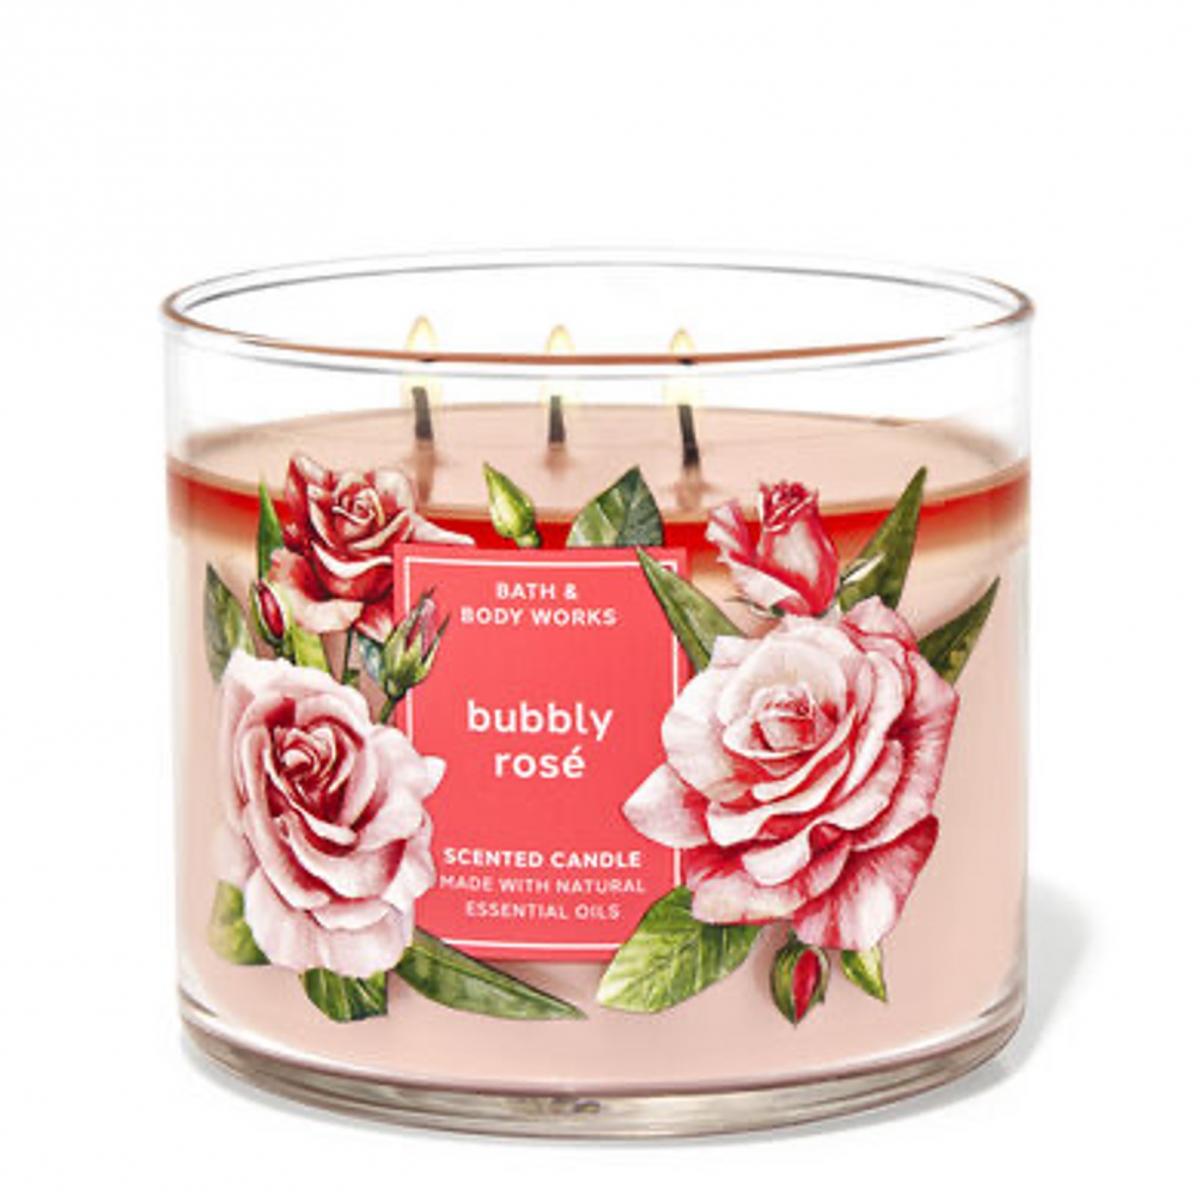 BUBBLY ROSÉ 3-Wick Candle 14.5oz / 411g (Parallel Imported Goods)